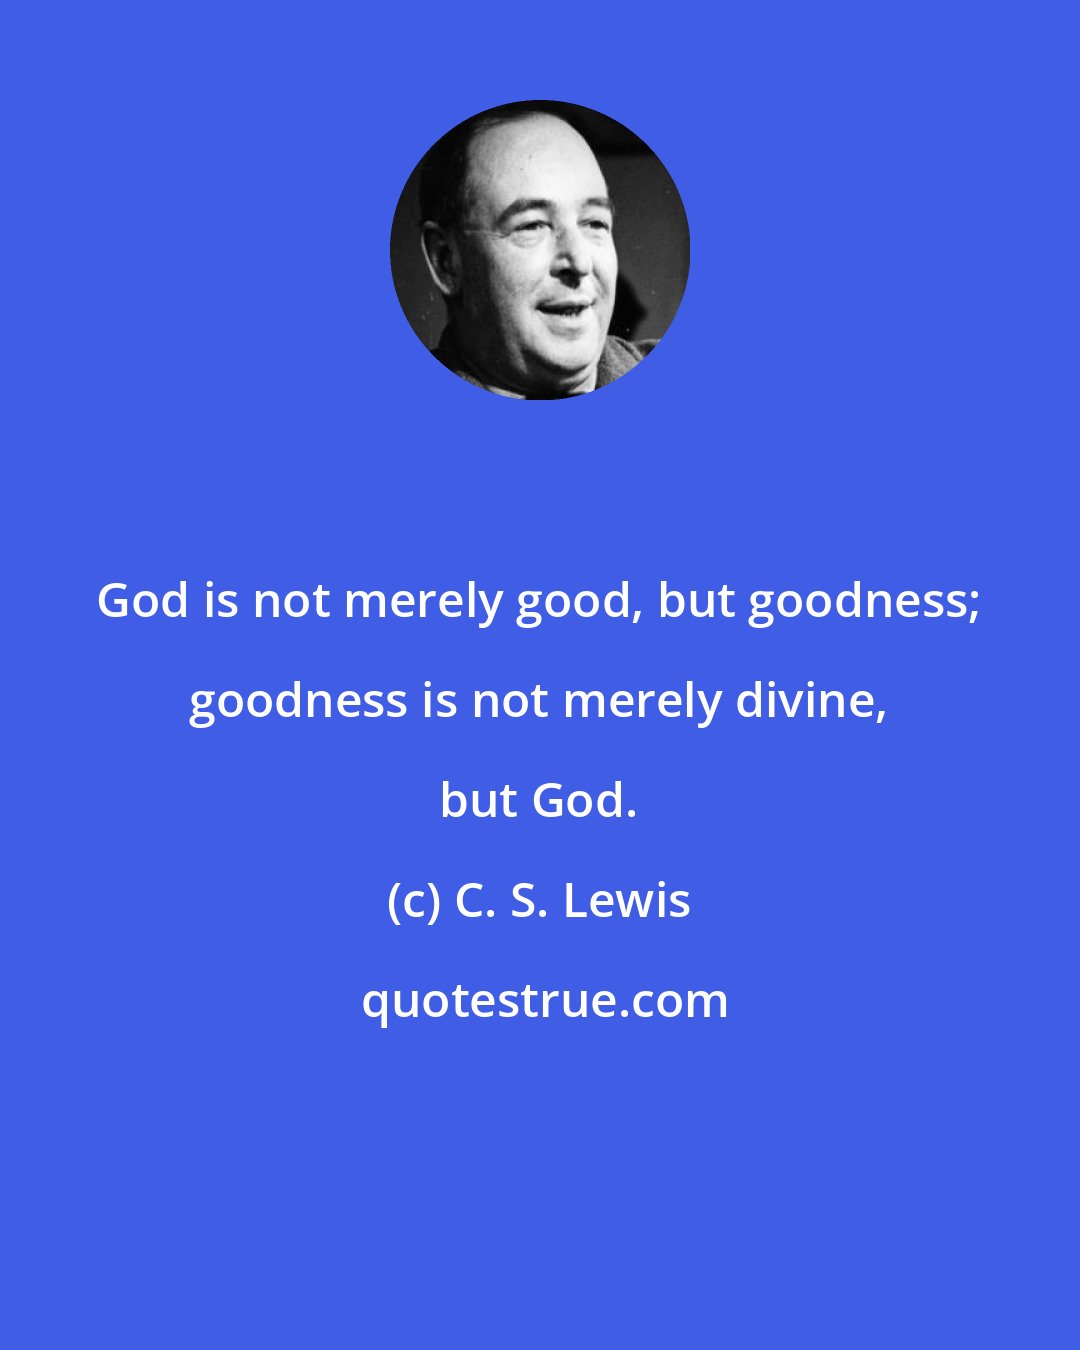 C. S. Lewis: God is not merely good, but goodness; goodness is not merely divine, but God.